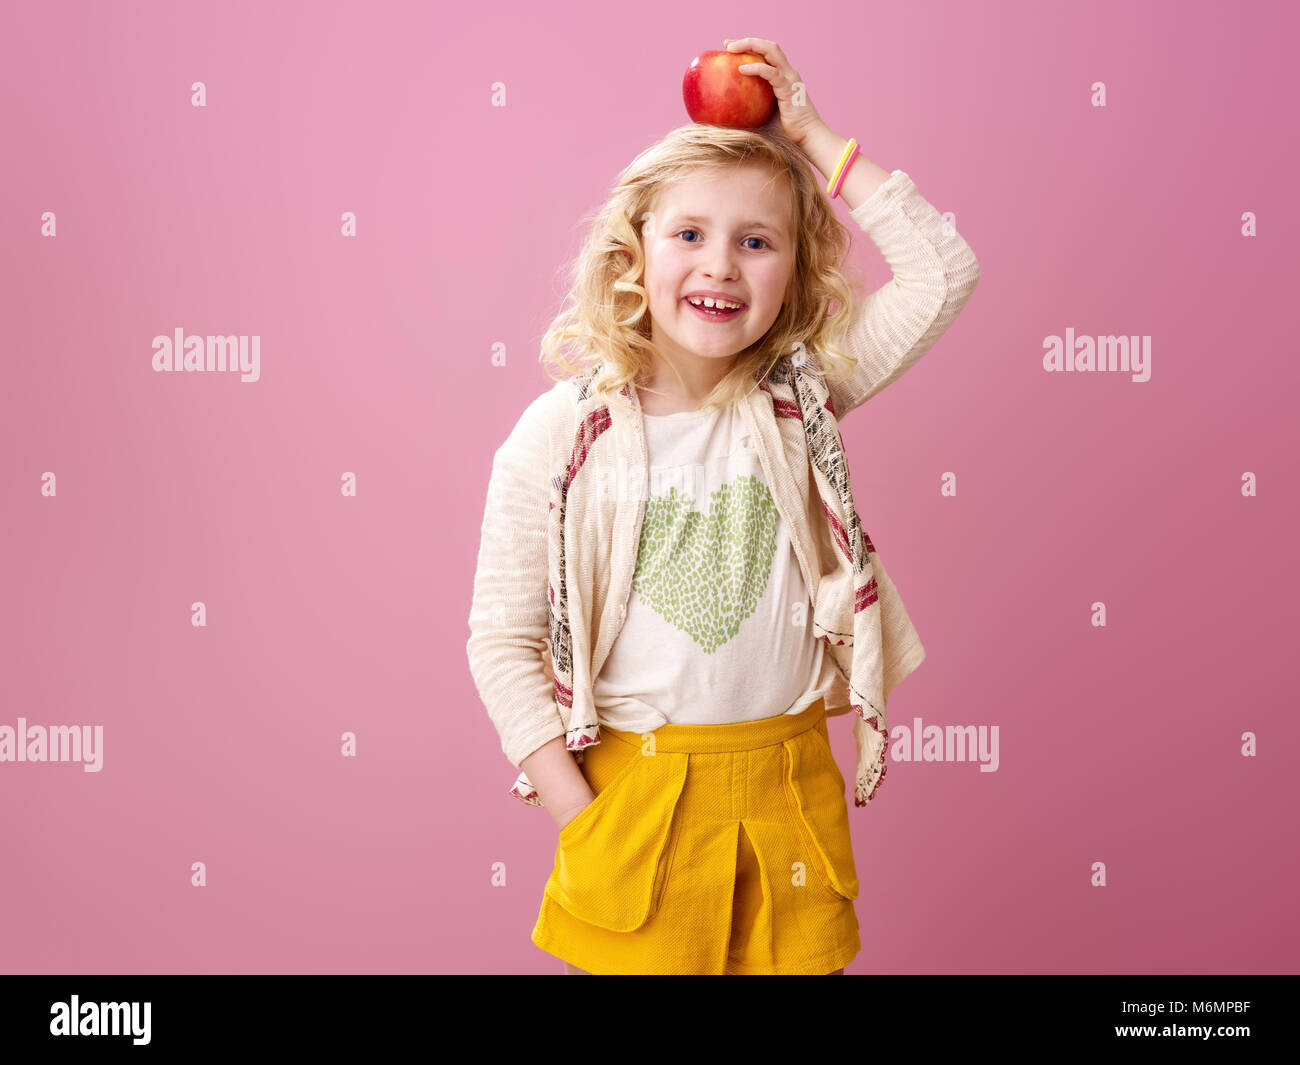 6. Wavy Blonde Hair Girl Pictures, Images and Stock Photos - iStock - wide 4